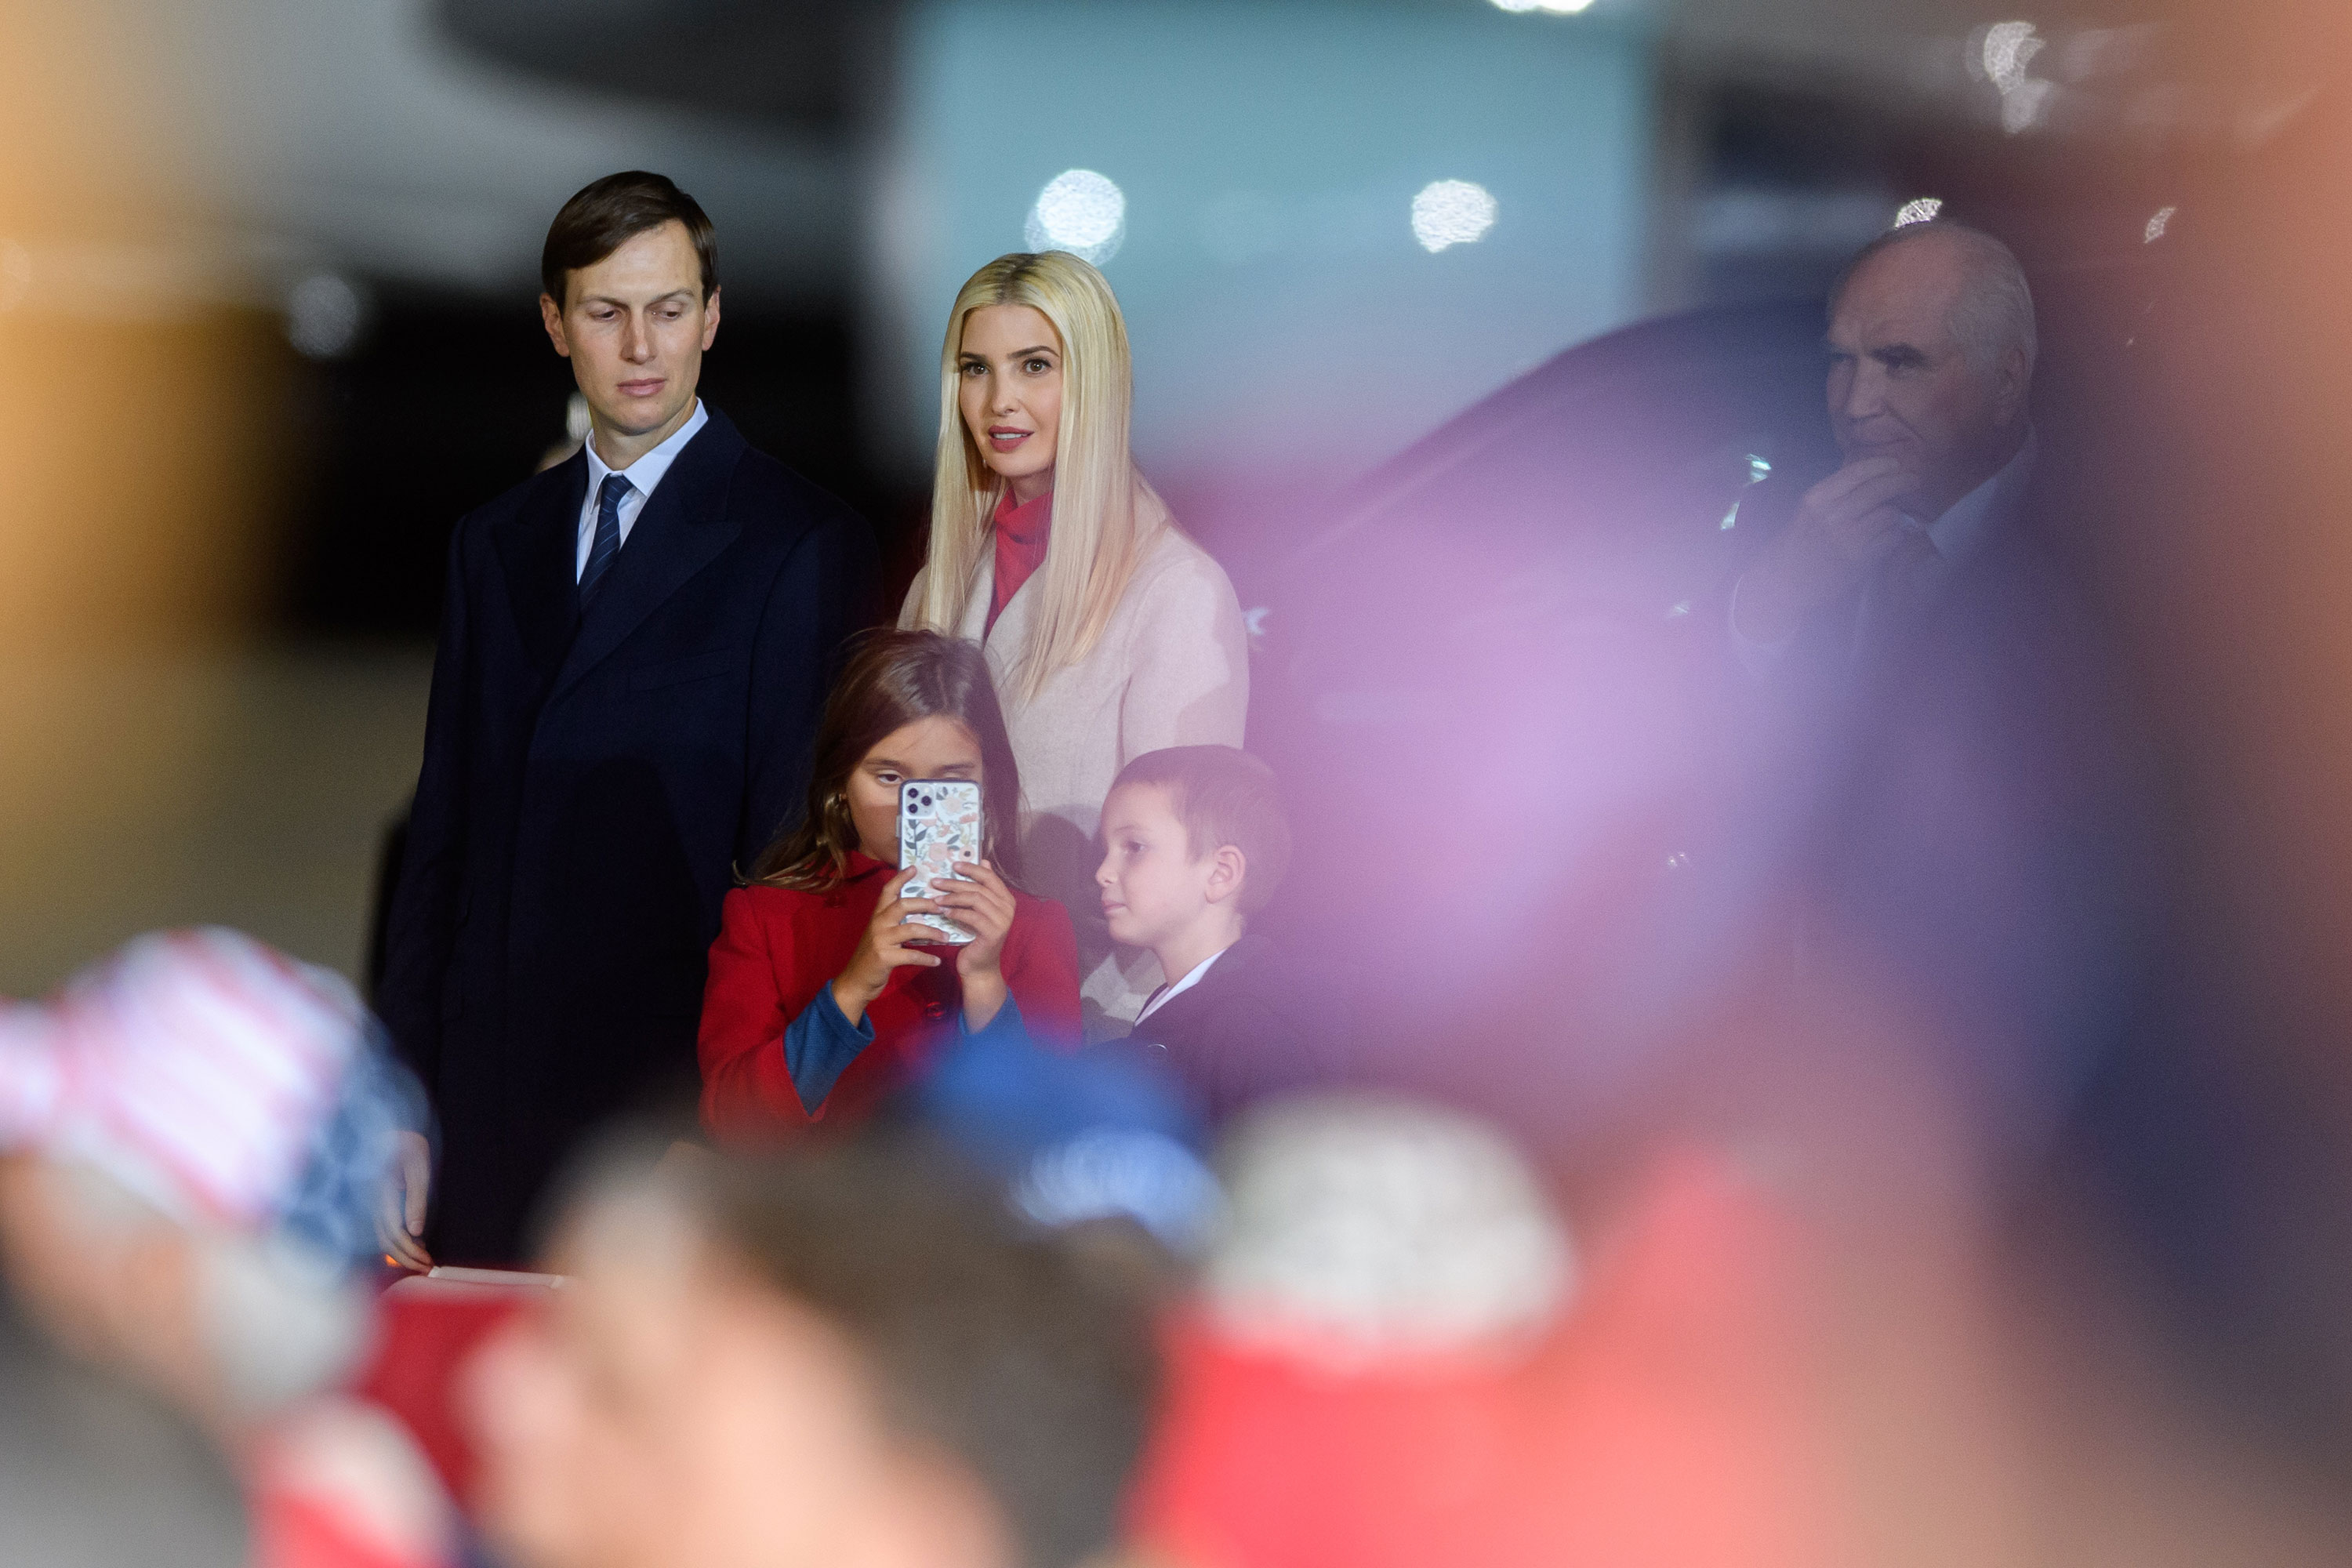 Jared Kushner, Ivanka Trump and their children attend a campaign rally in Moon Township, Pennsylvania, on September 22.